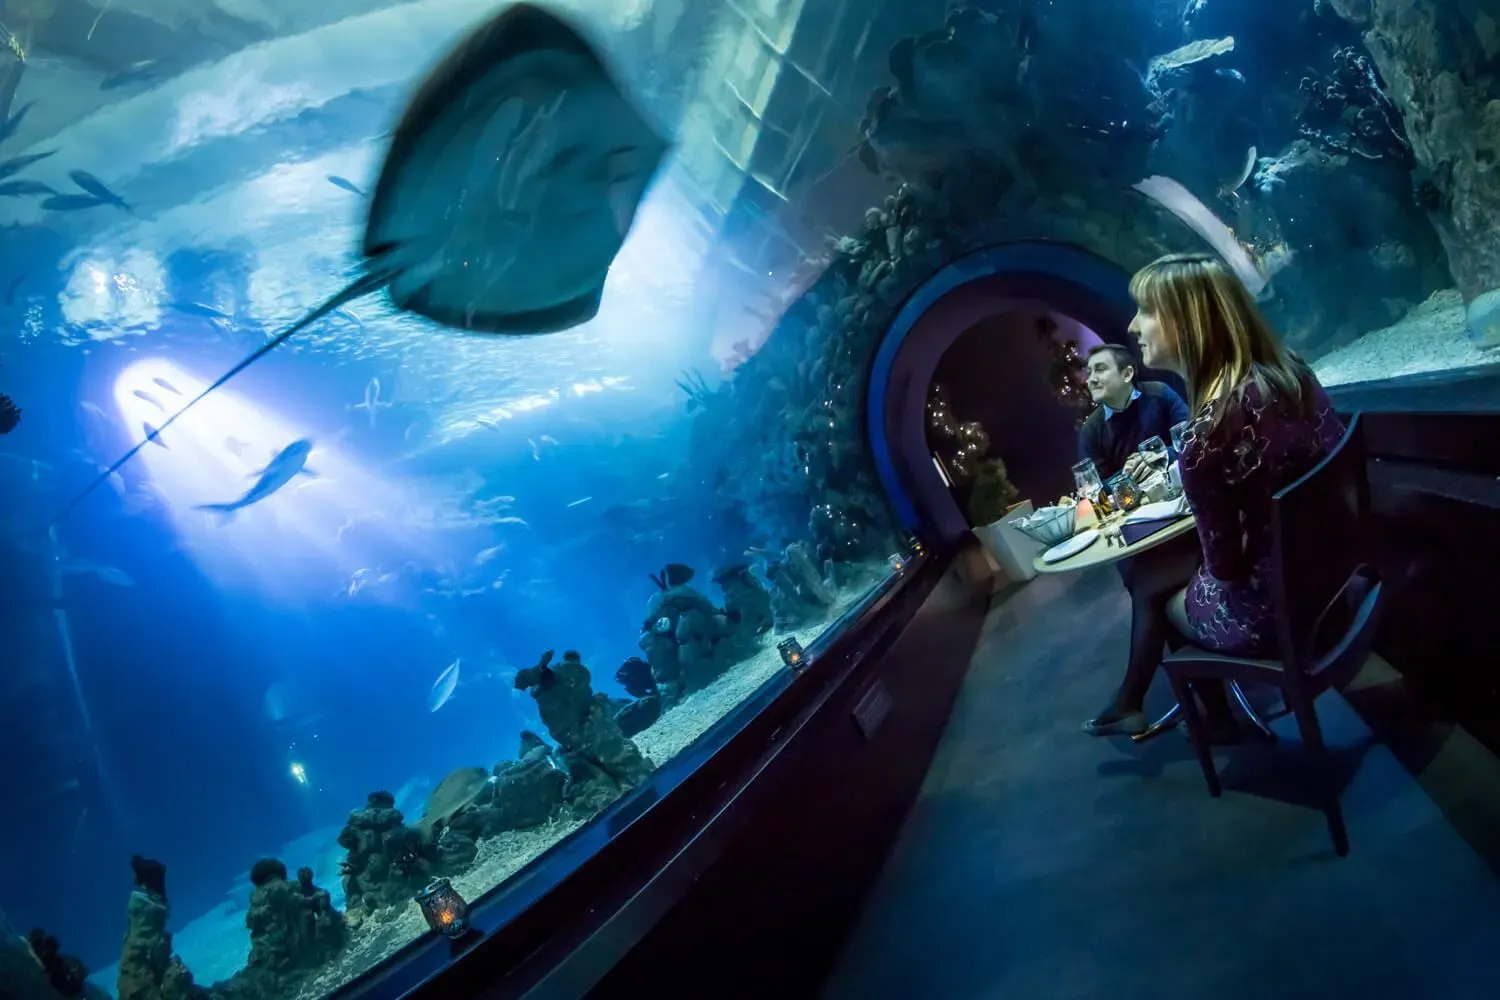 A view of the restaurant at The Deep in Hull, which has glass walls and ceiling with fish and a stingray swimming above.